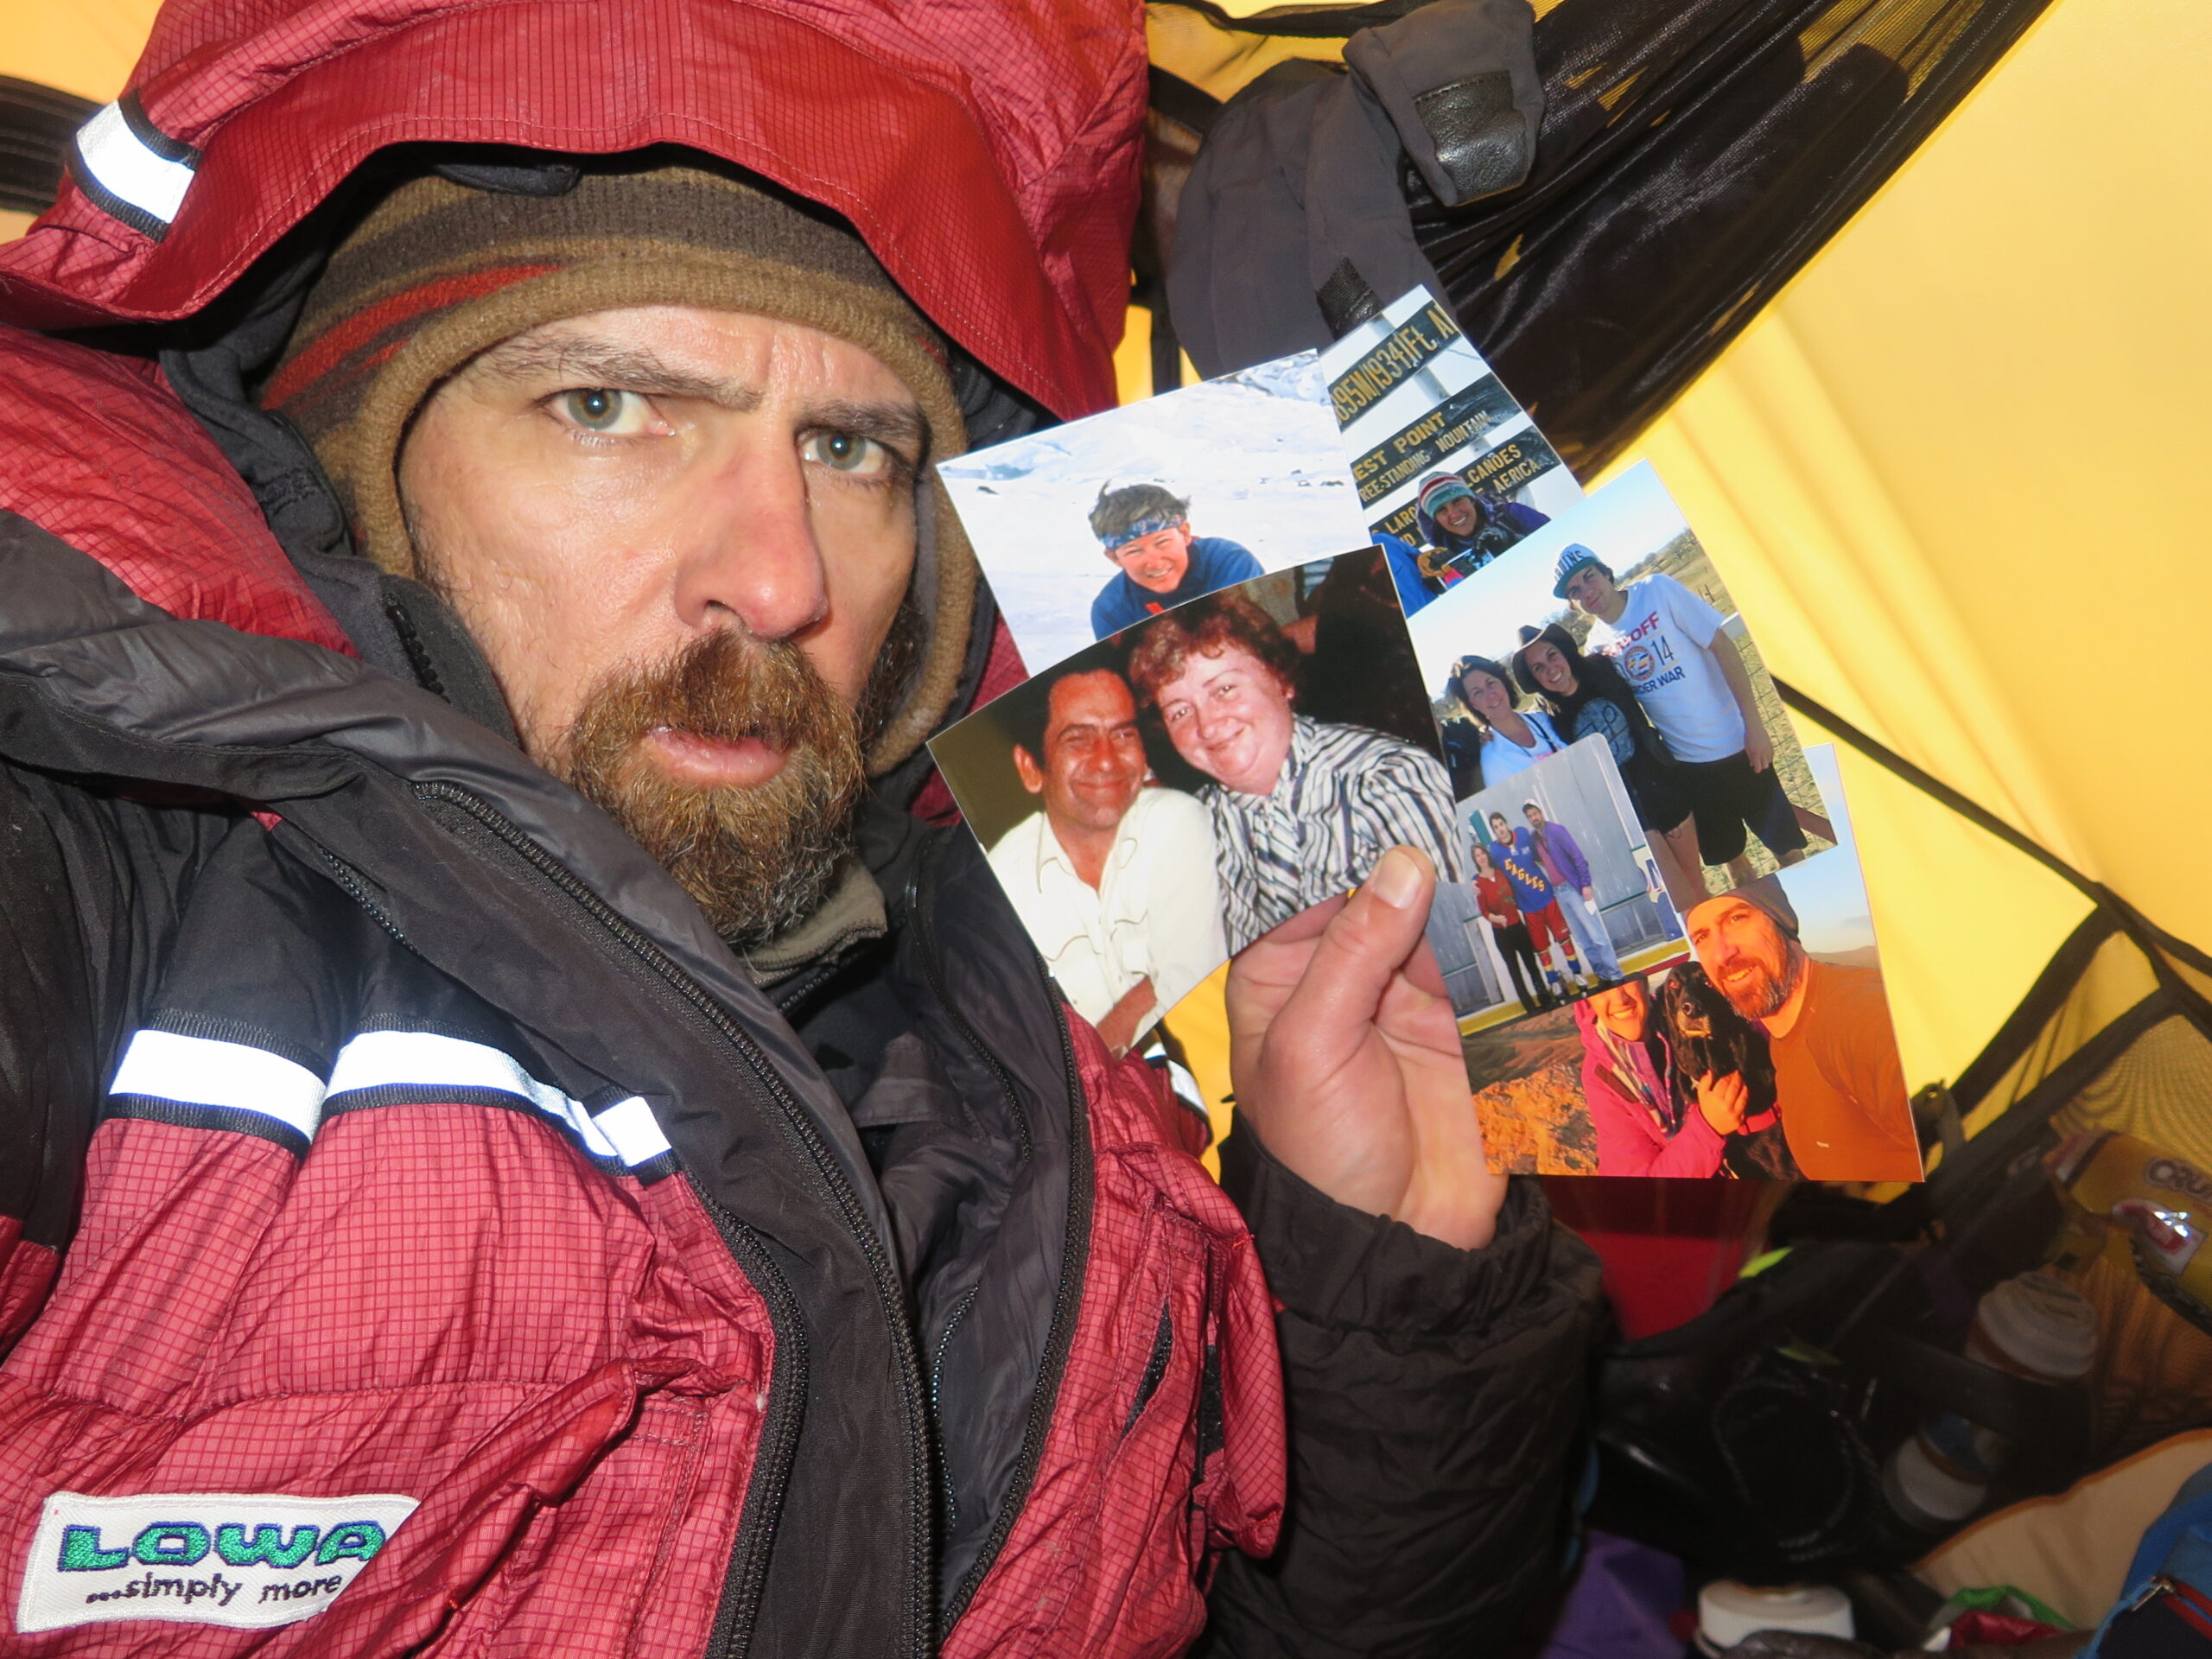 Jim Davidson holding pictures of his loved ones, while stuck on Everest (copyright speakingofadventure.com)